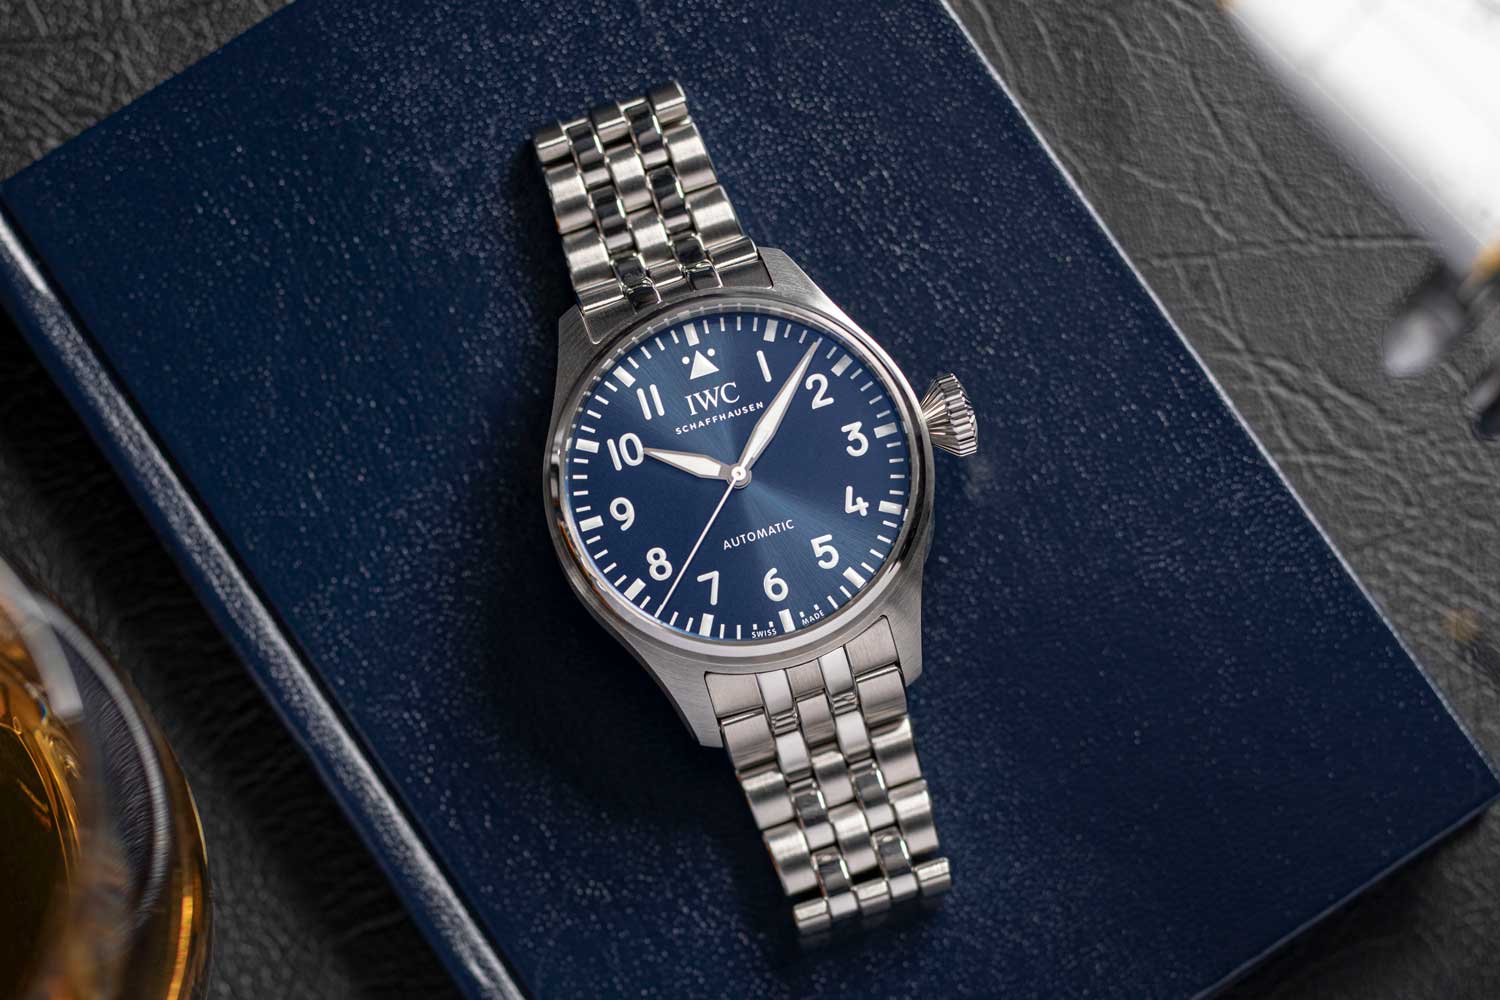 The Big Pilot 43, in a more contemporary case size of 43mm, is the latest in a long line of stunning pilot’s watches from IWC